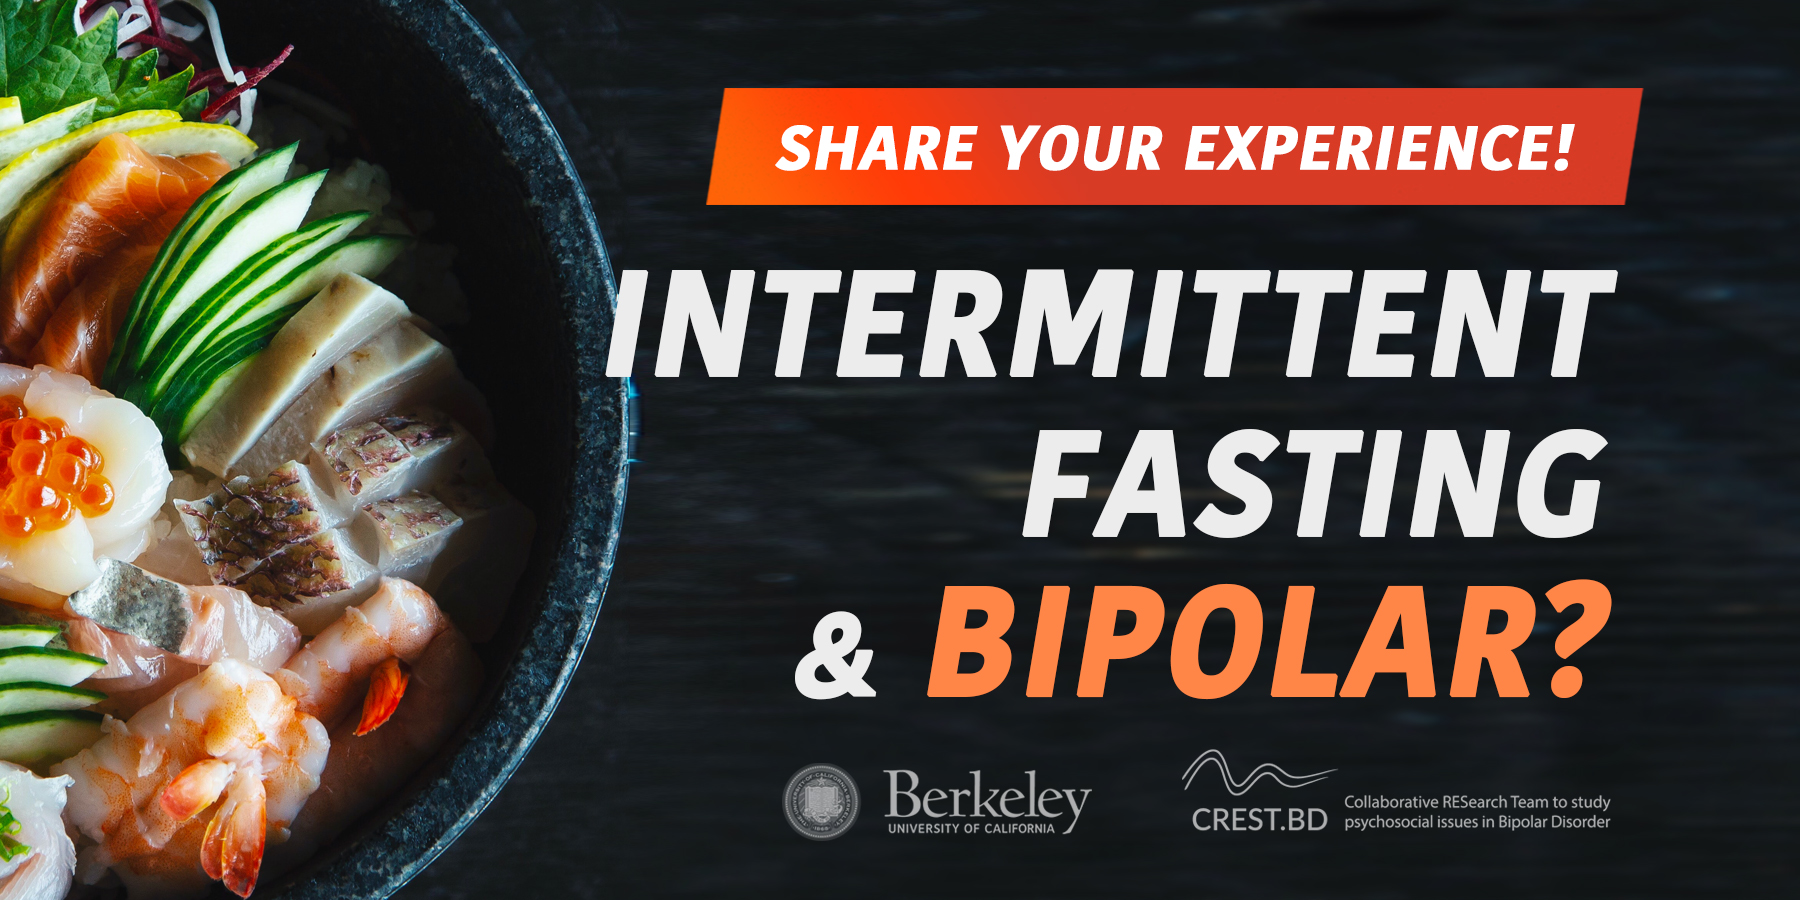 Does intermittent fasting help bipolar disorder? ⏰ Let us know!